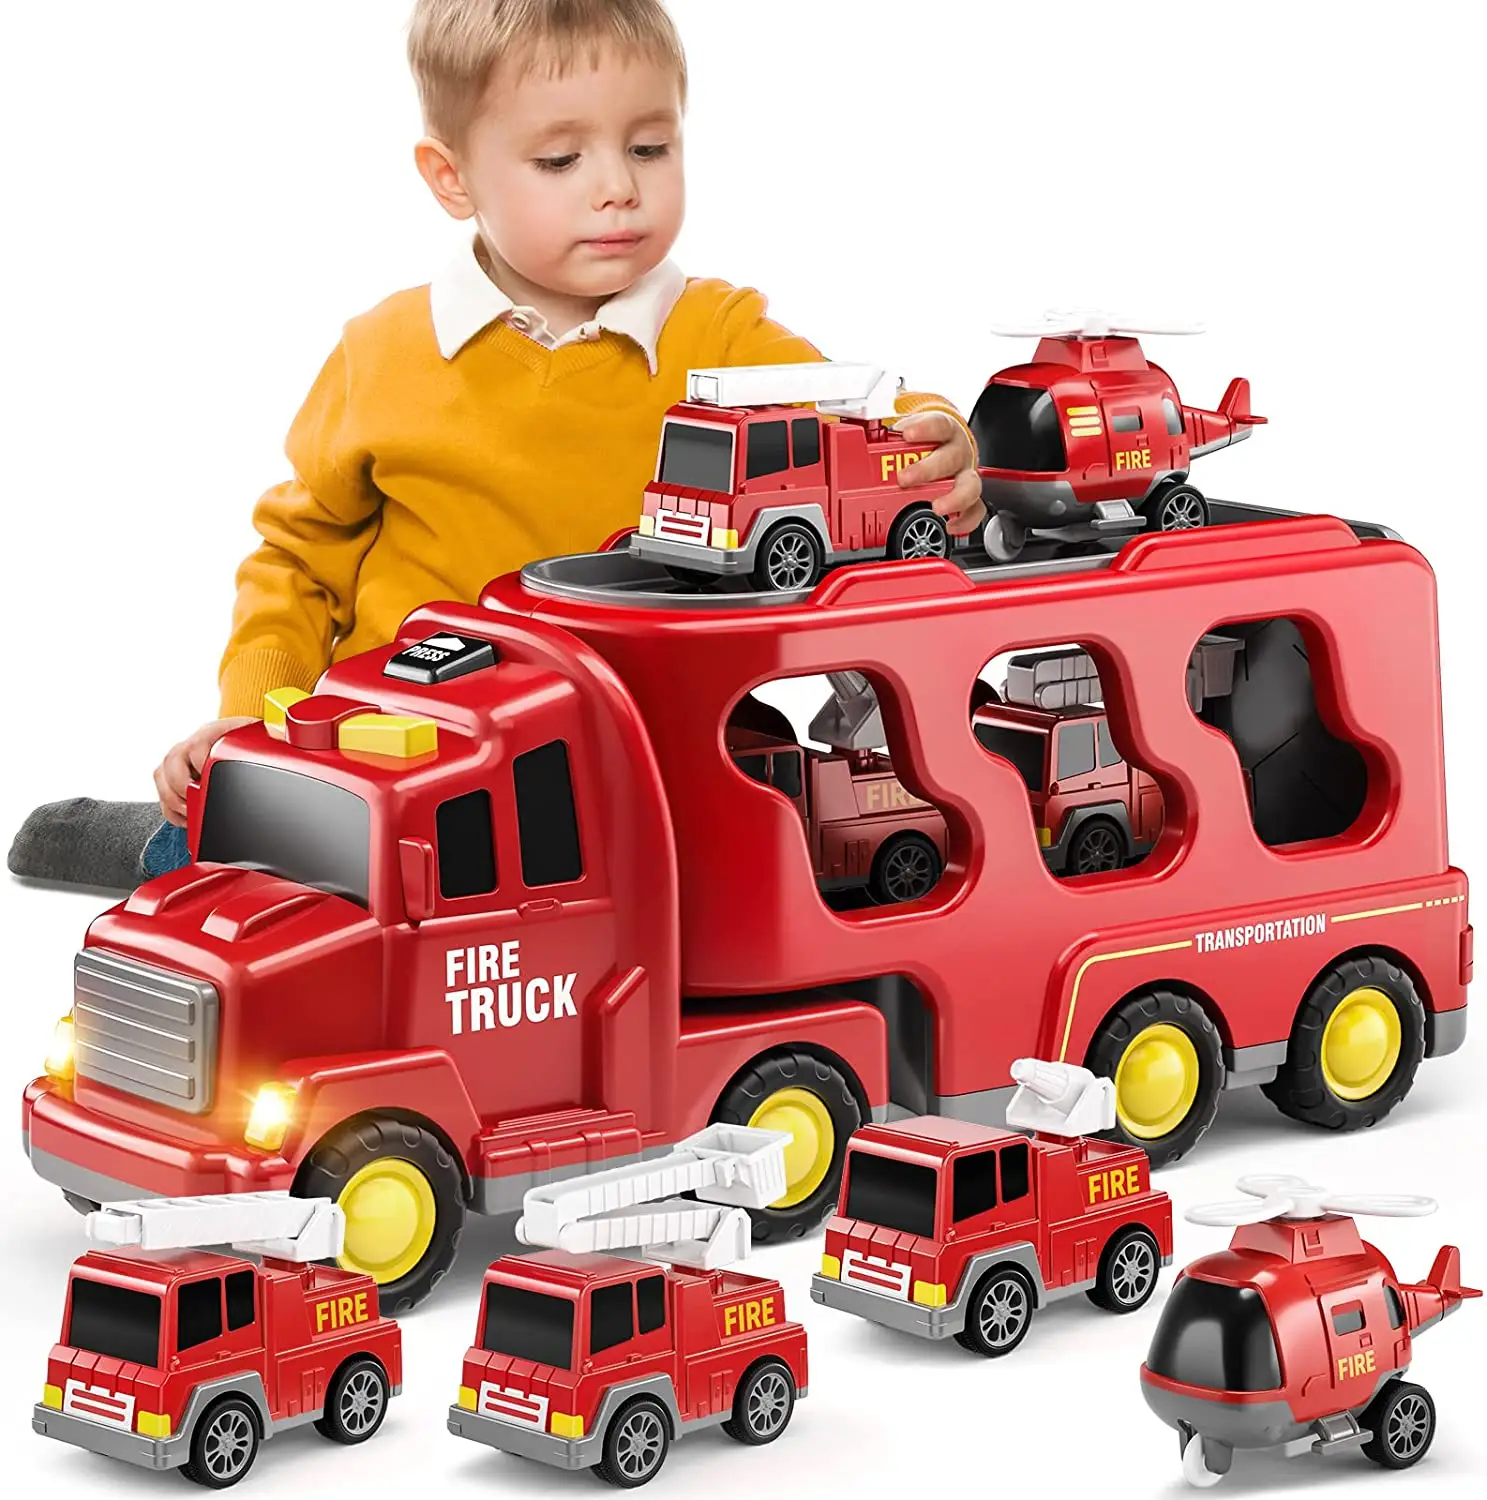 Toddler Toy vehicles